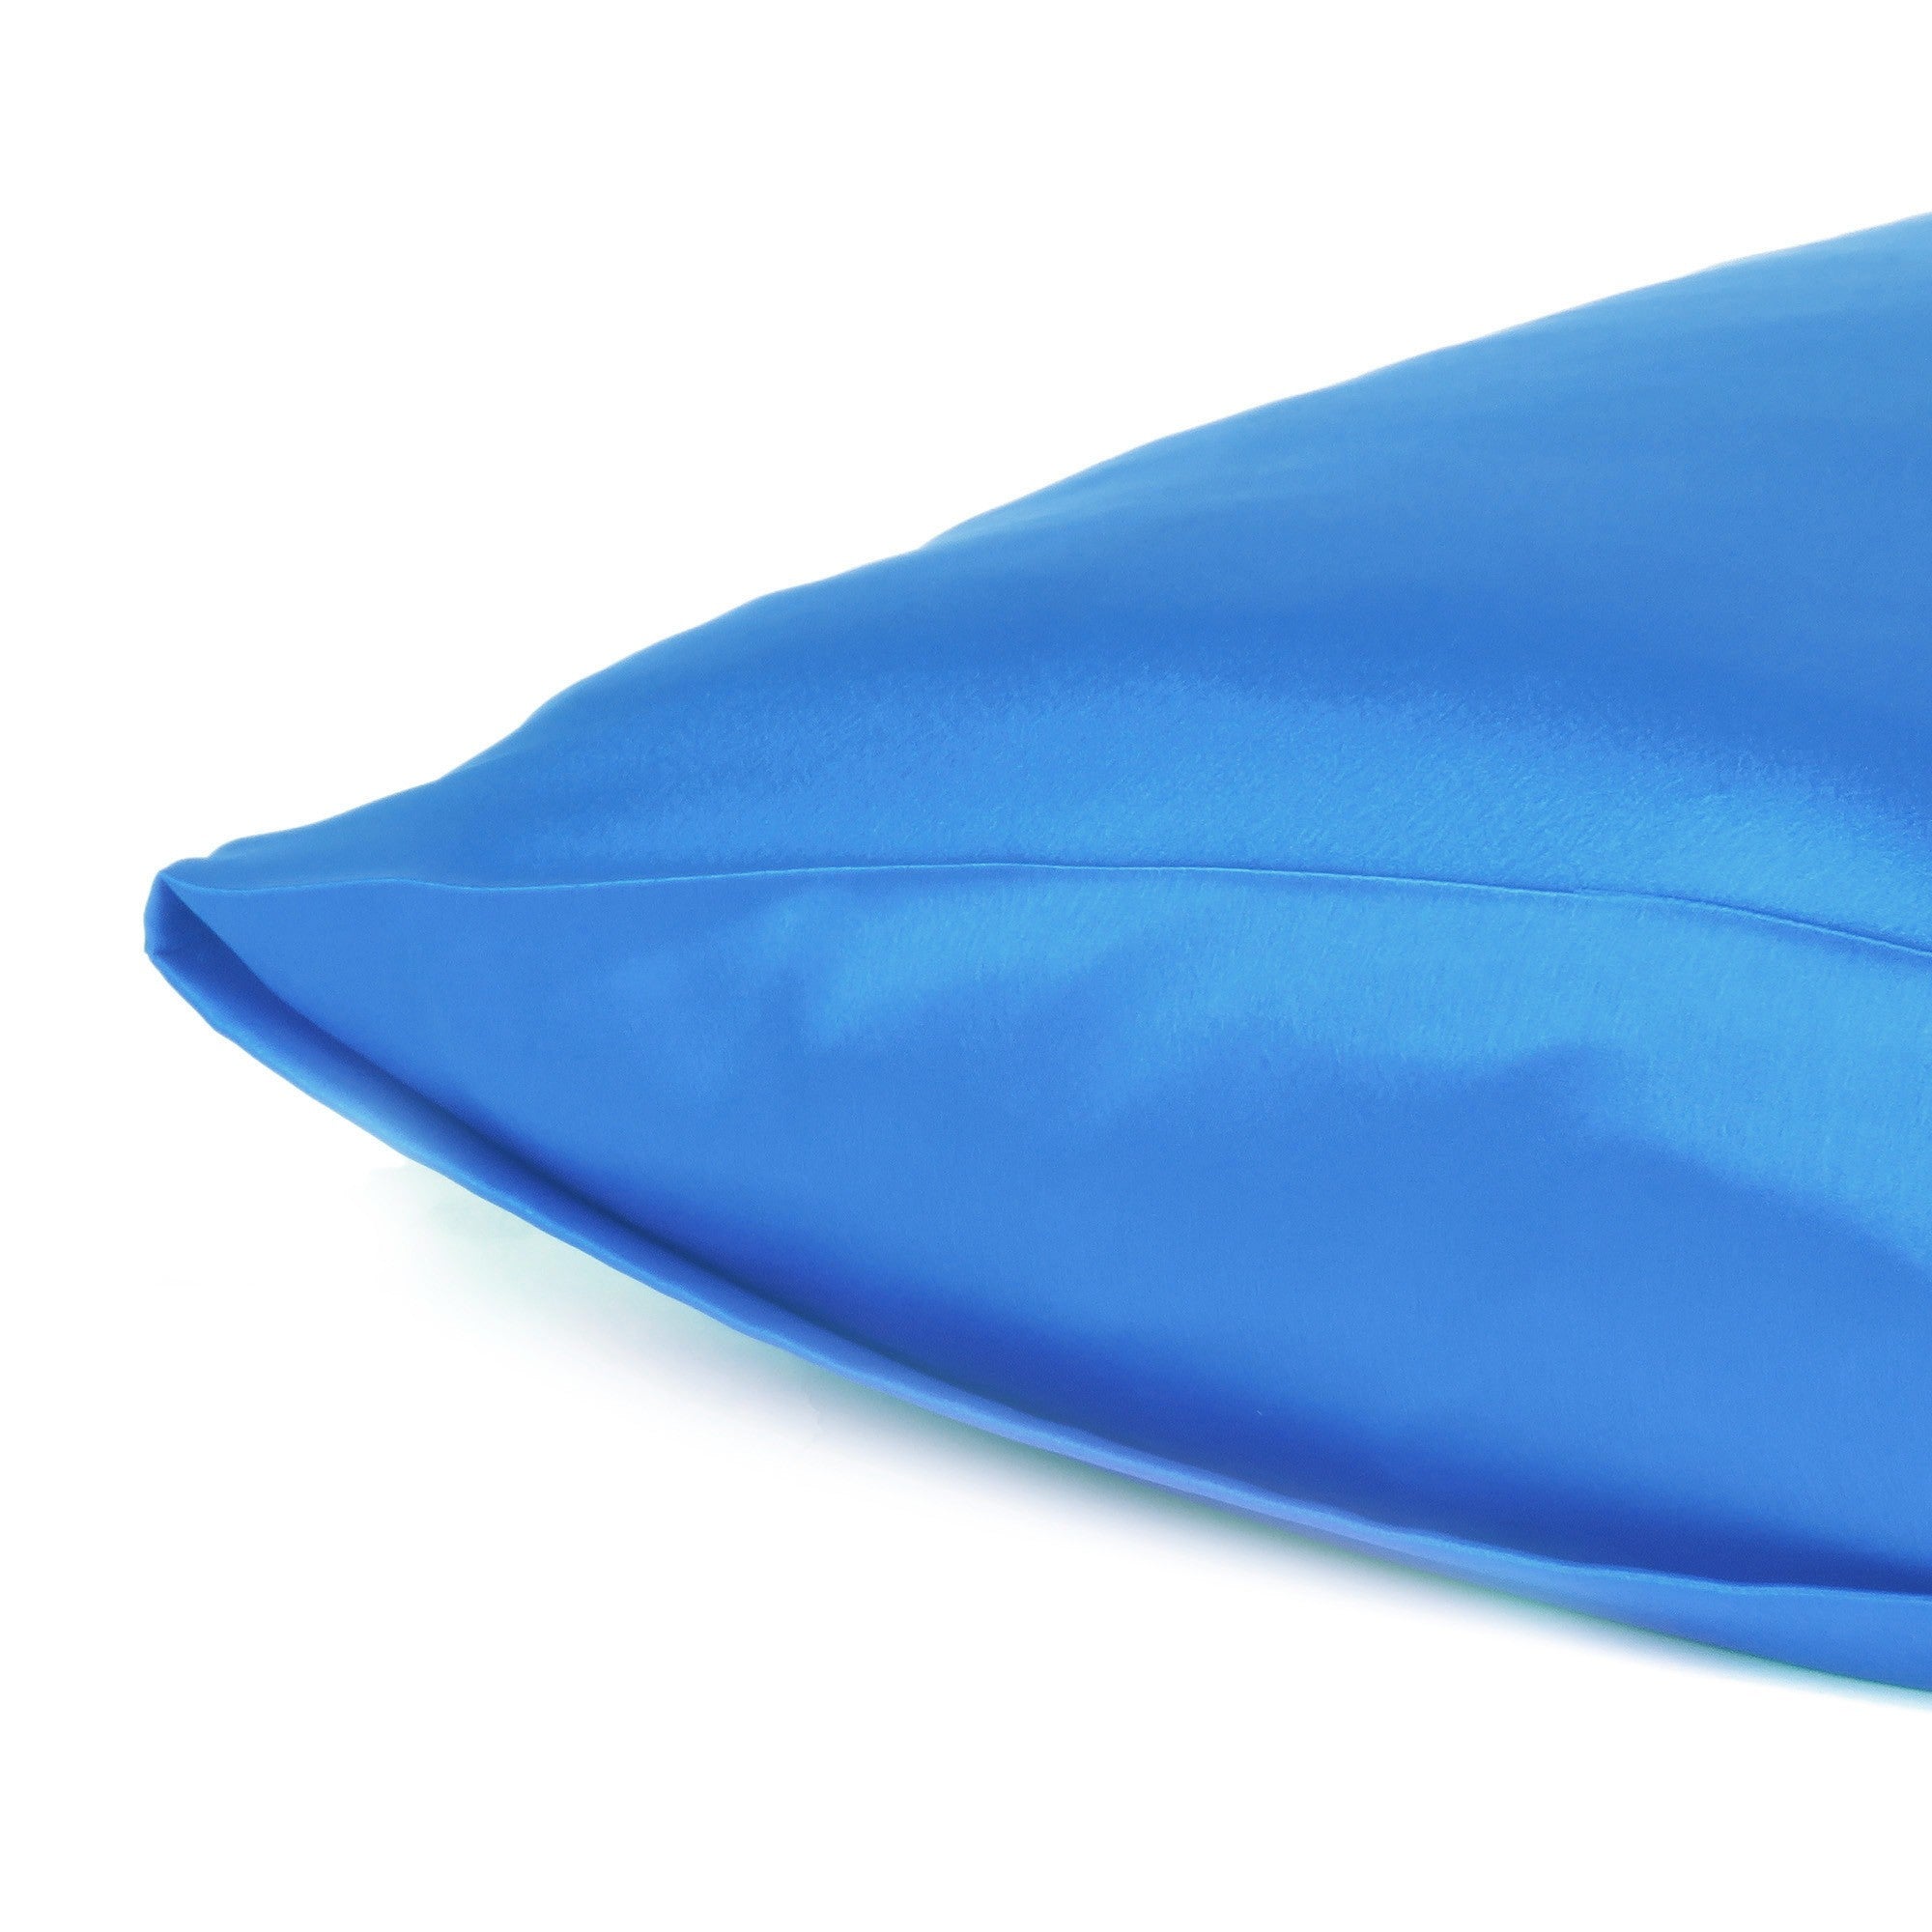 Set of Two Bright Blue Dreamy Silky Satin King Pillowcases - Tuesday Morning-Bed Sheets